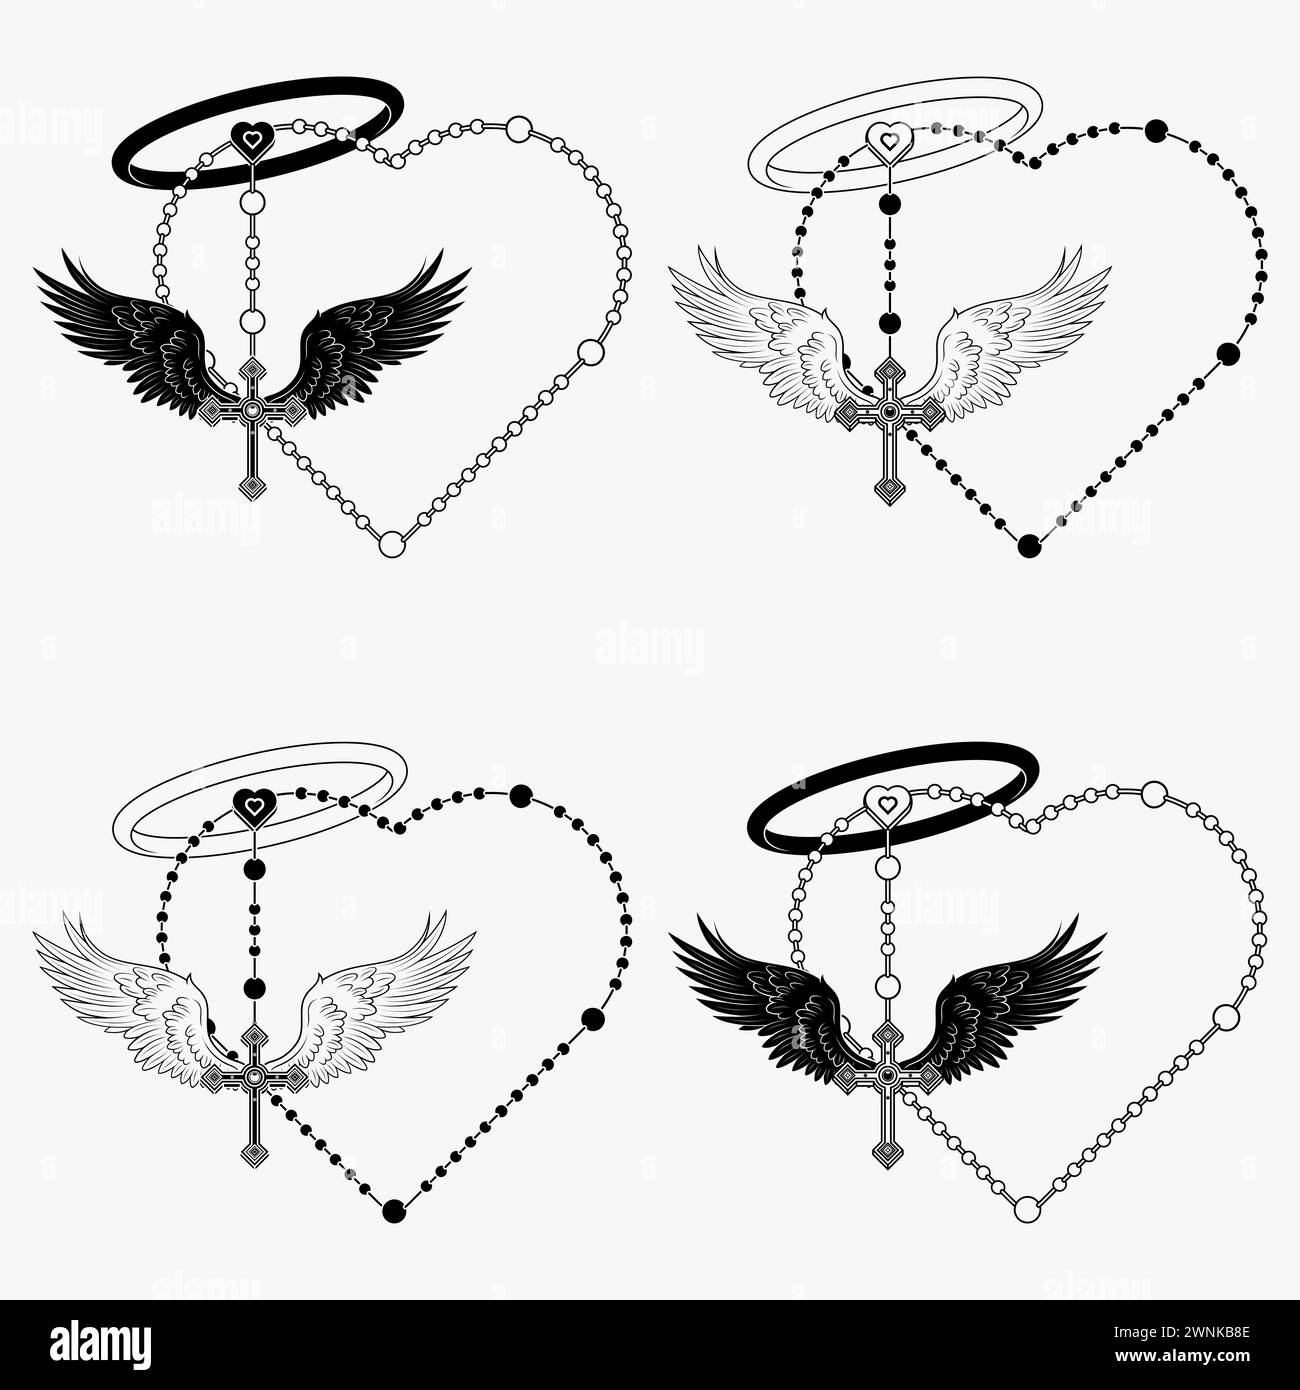 Vector design of winged cross with heart-shaped rosary, heart-shaped rosary with wings, symbology of the Catholic religion Stock Vector